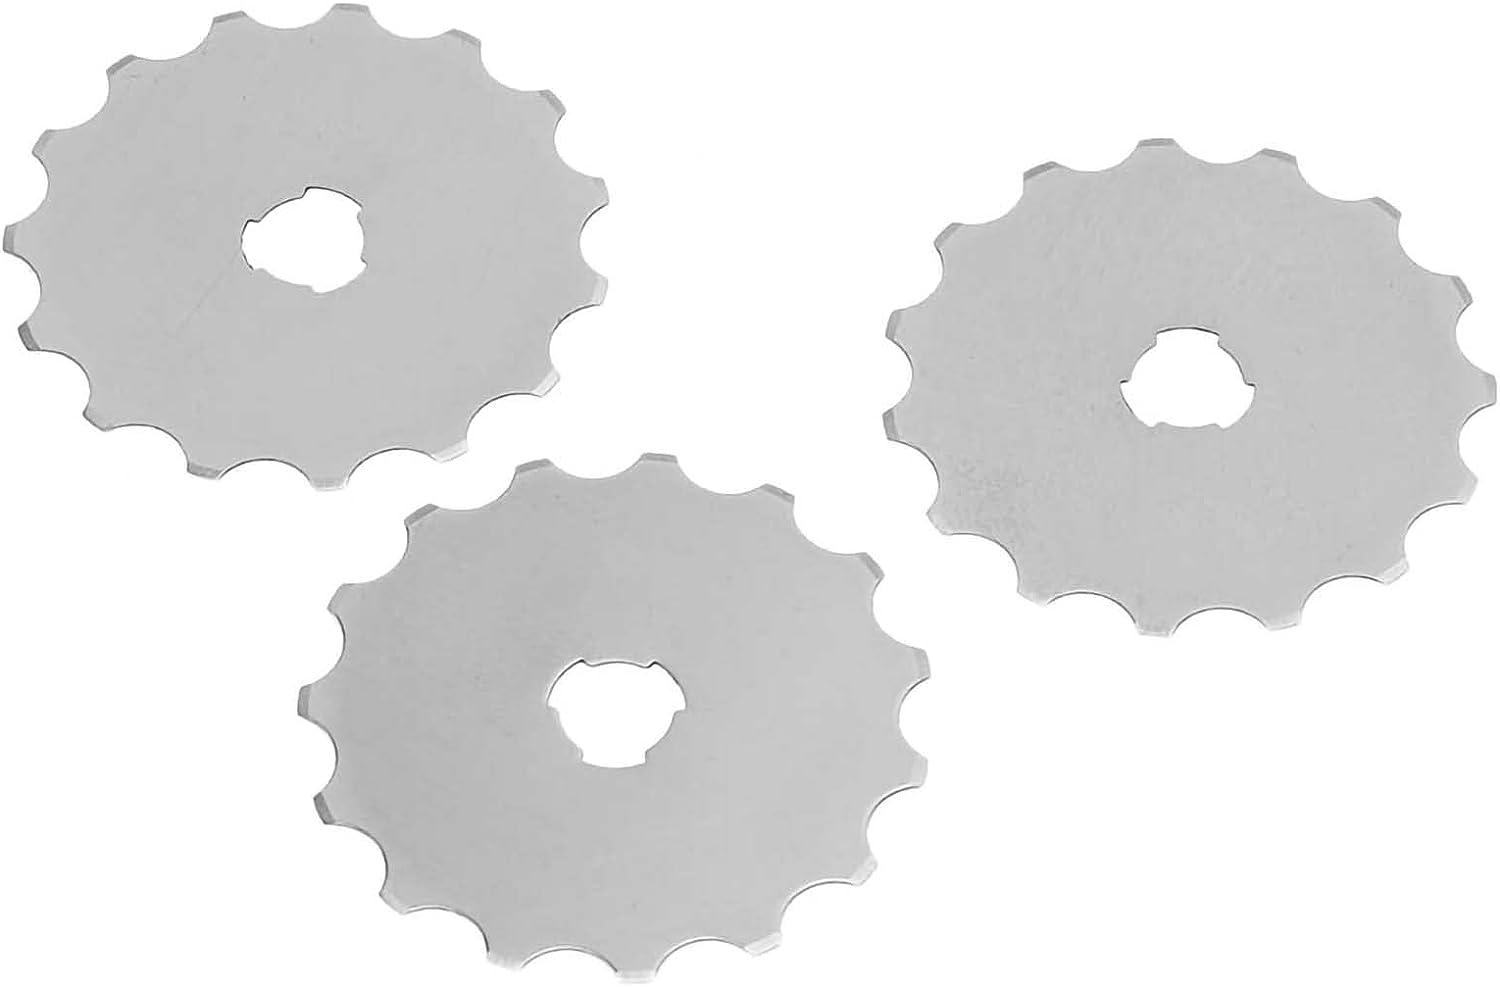 Watris Veiyi 45mm Rotary Cutter Blades, 5PCS Perforating Rotary Replacement  Blade, Wide Skip Blade Edging Tool for Crochet Edge Projects, Fleece